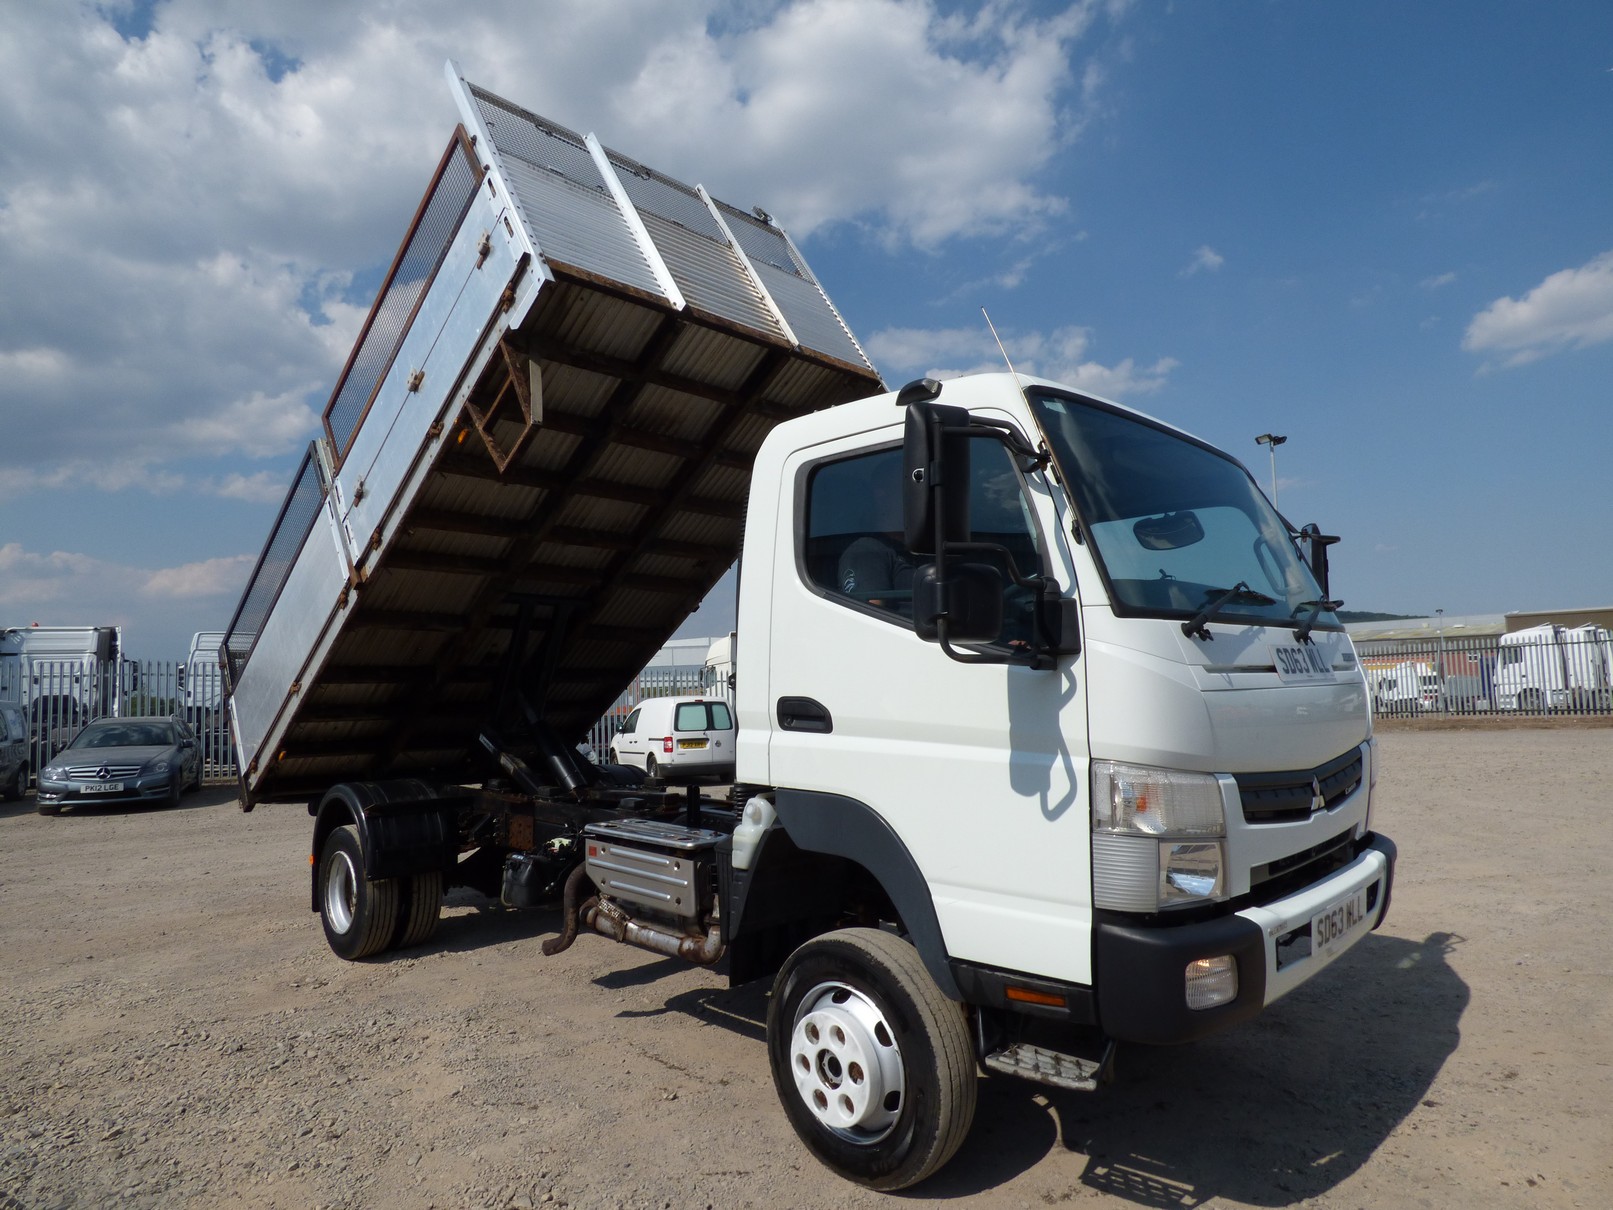 Mitsubishi Fuso Canter C6180 Side View with Trailer Raised